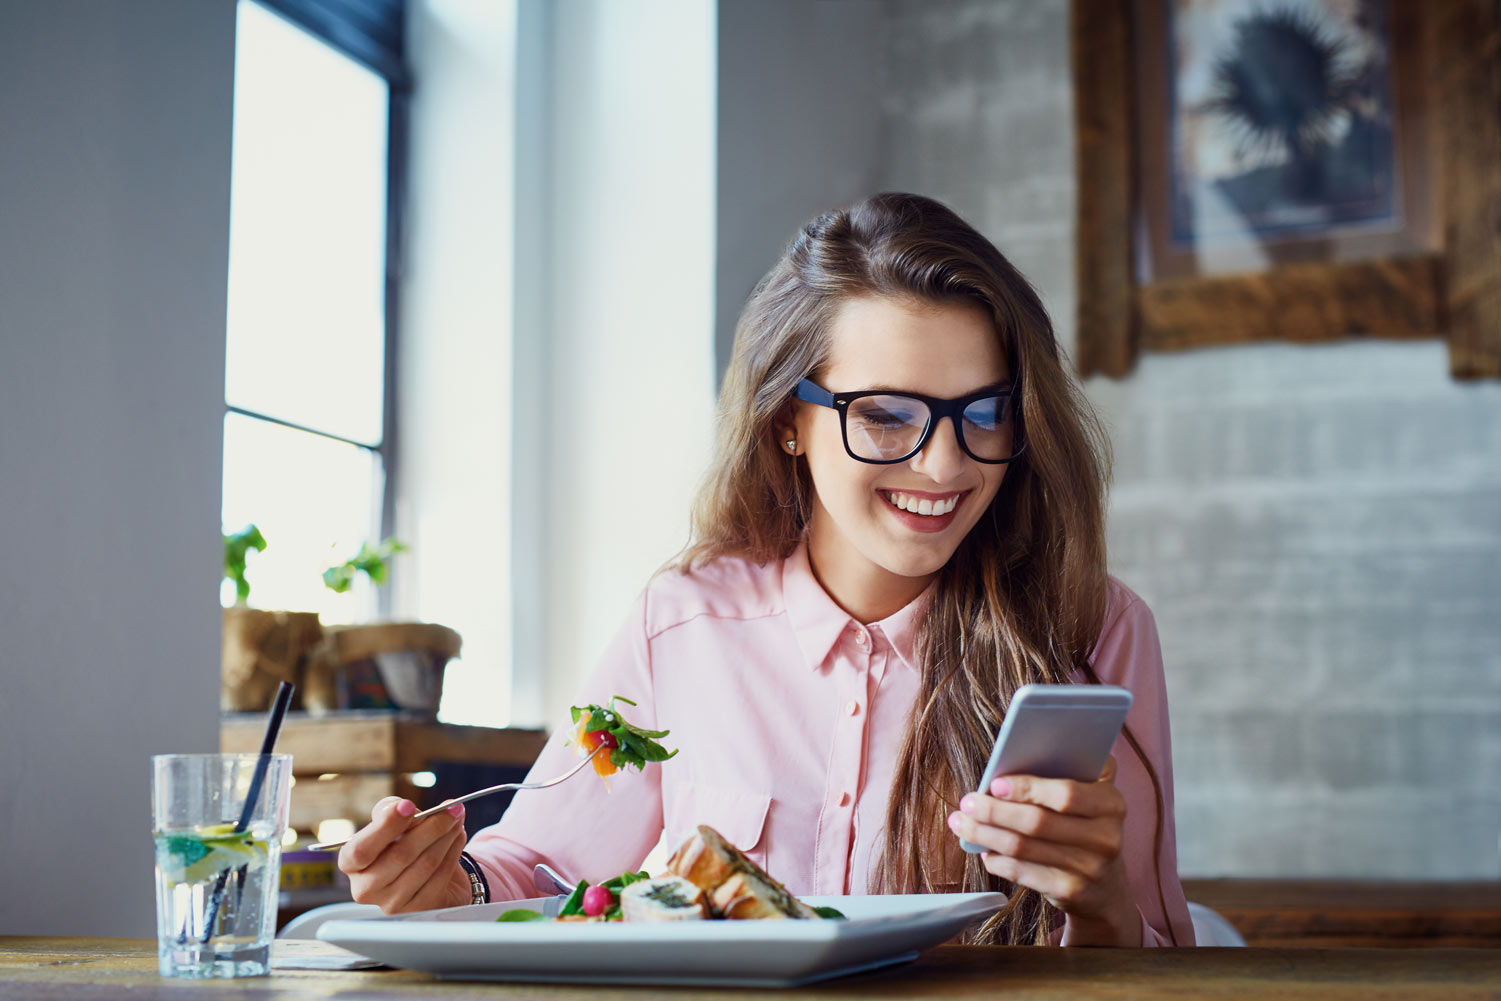 Woman Eating And Using Phone